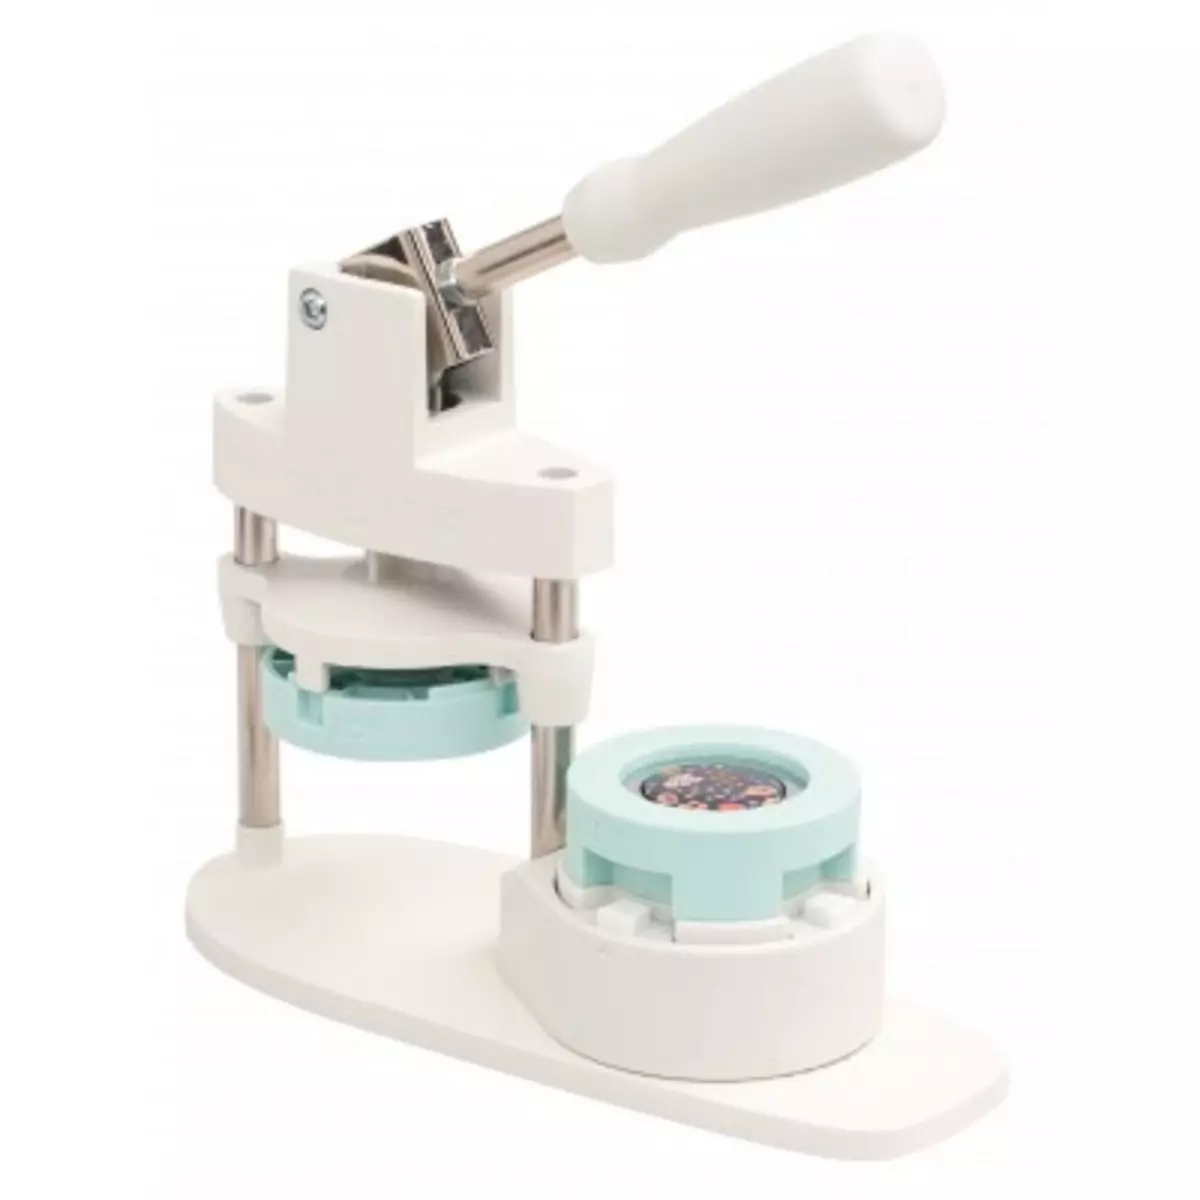 We R Memory Keepers KIT BUTTON PRESS TOOL- PRESSE À BOUTONS